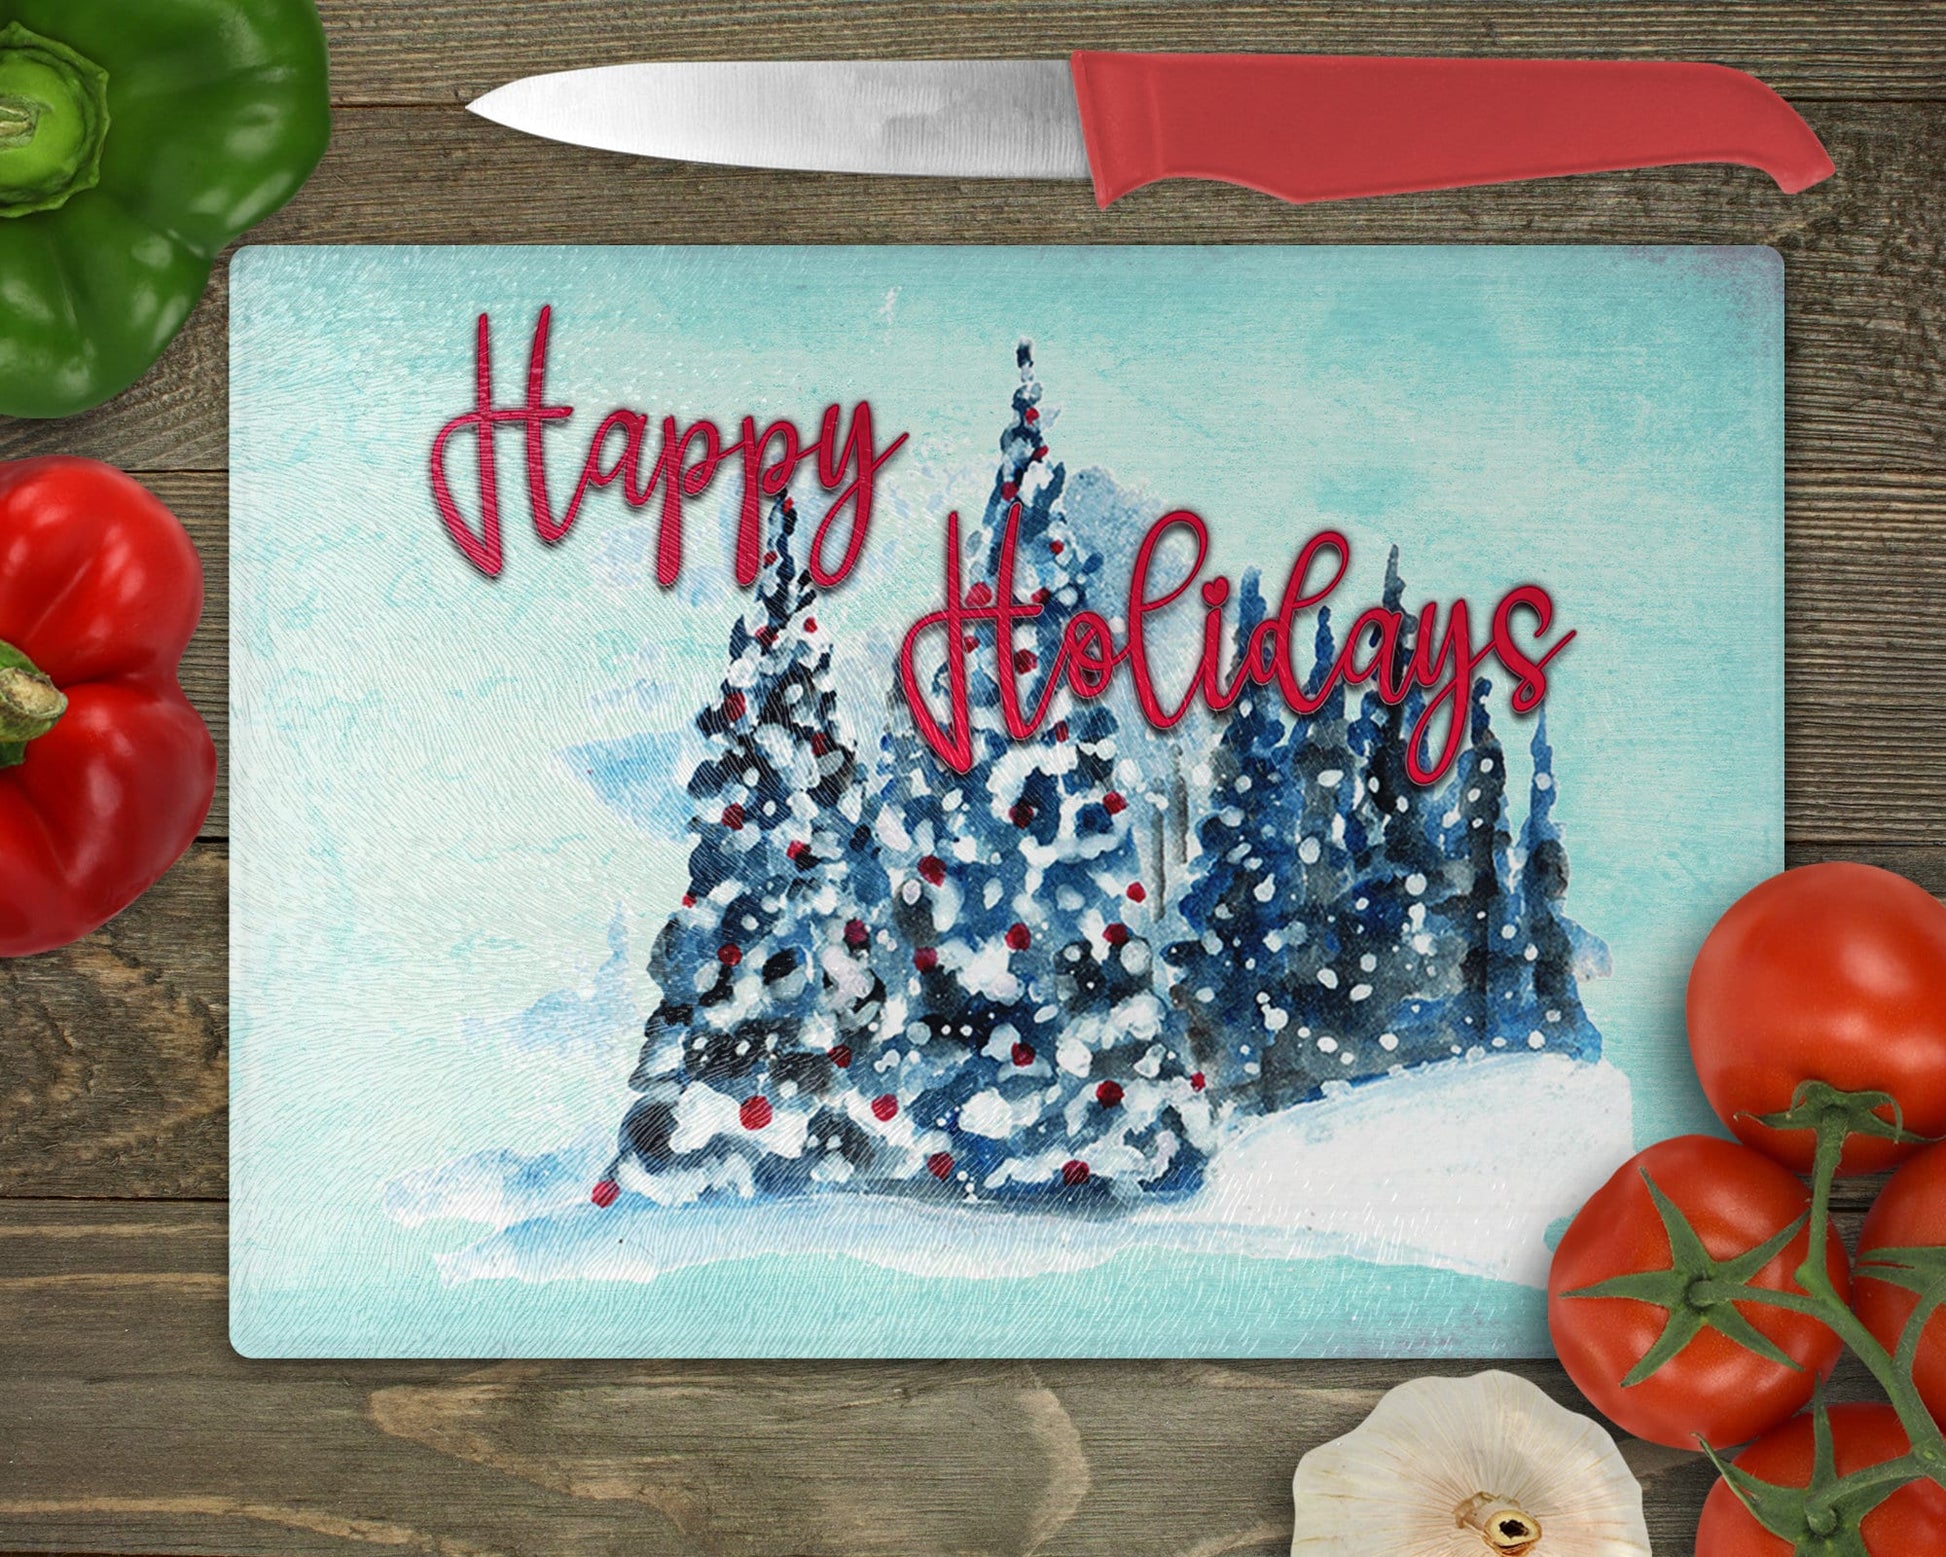 Happy Holidays Watercolor Style Christmas Trees Art Decorative Glass Cutting Board|Kitchen Decor|Home Decor| - Schoppix Gifts